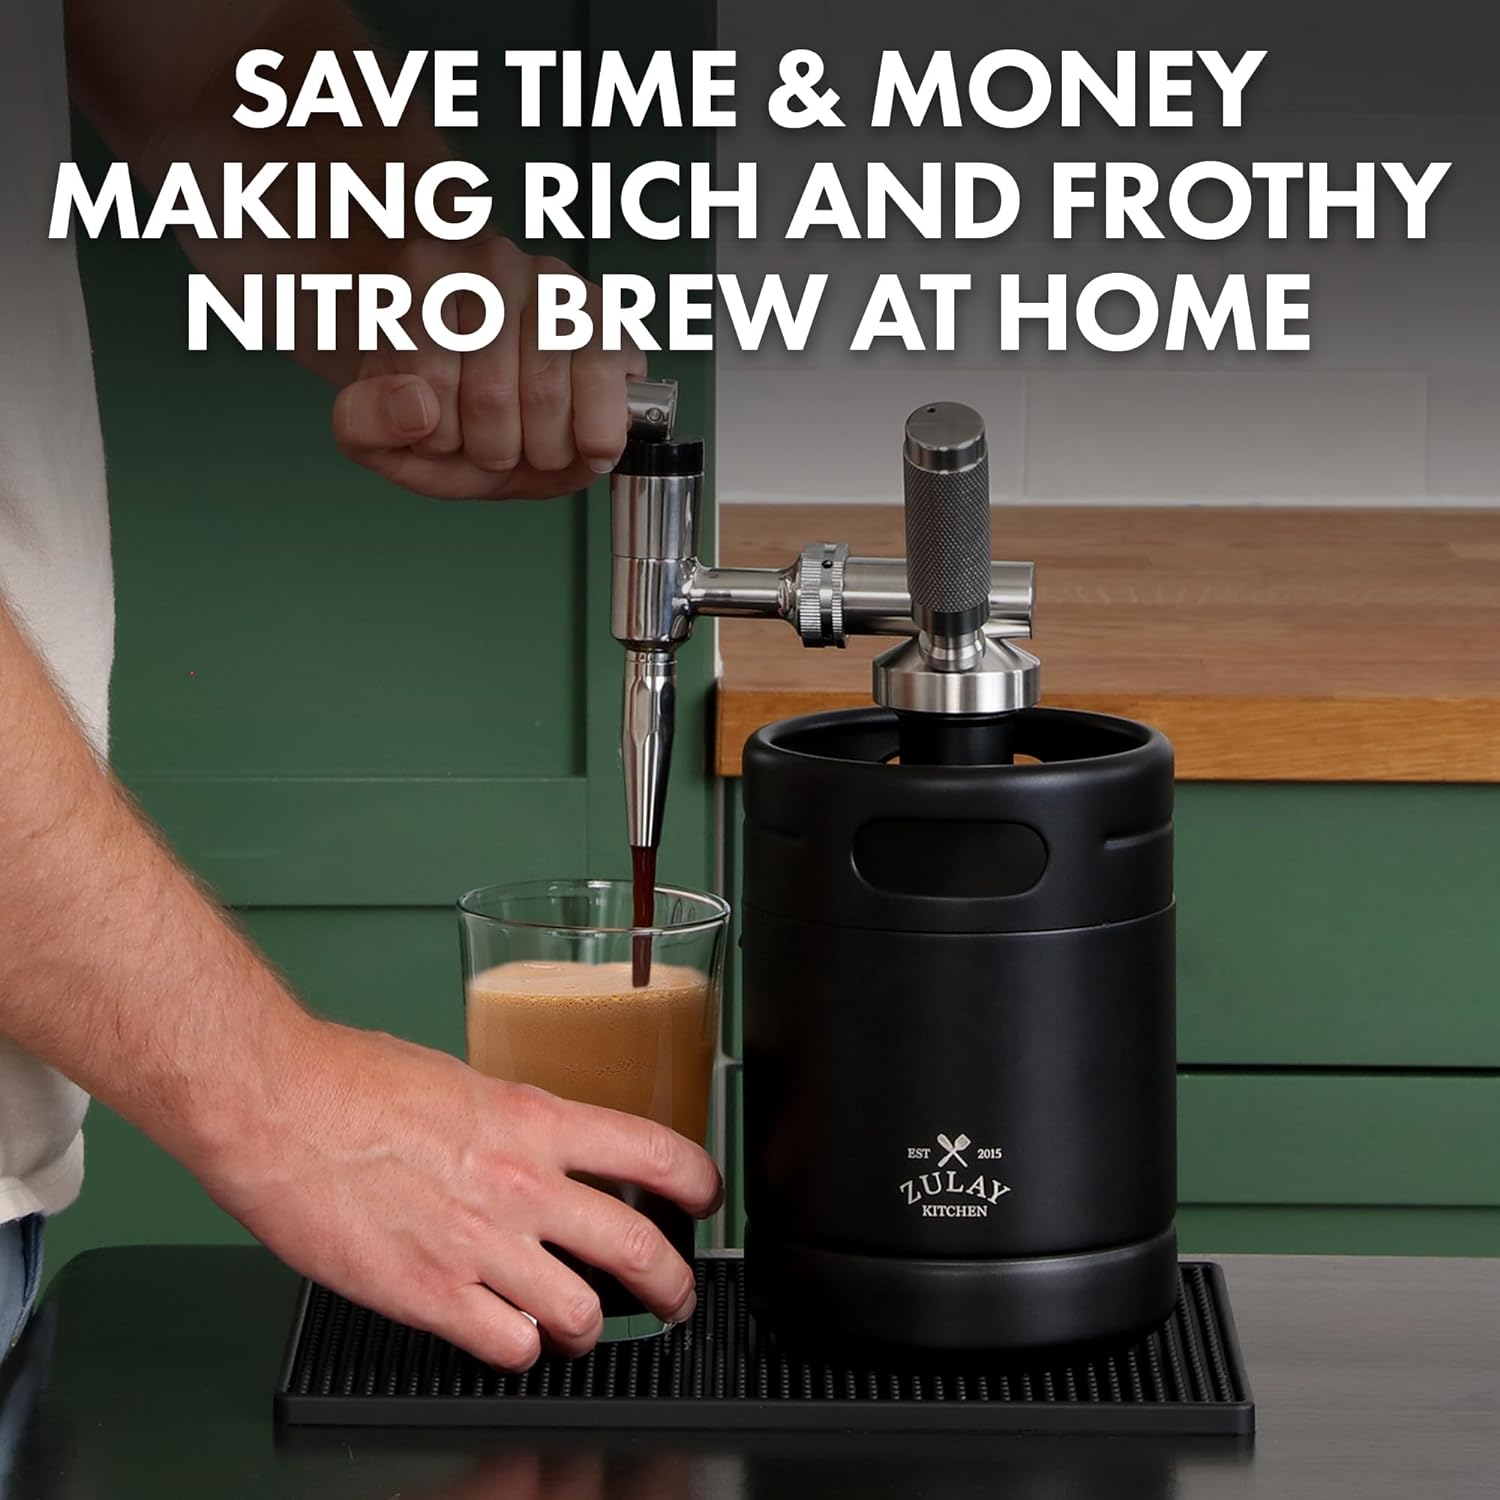 Cold Brew Maker, coffee, , house